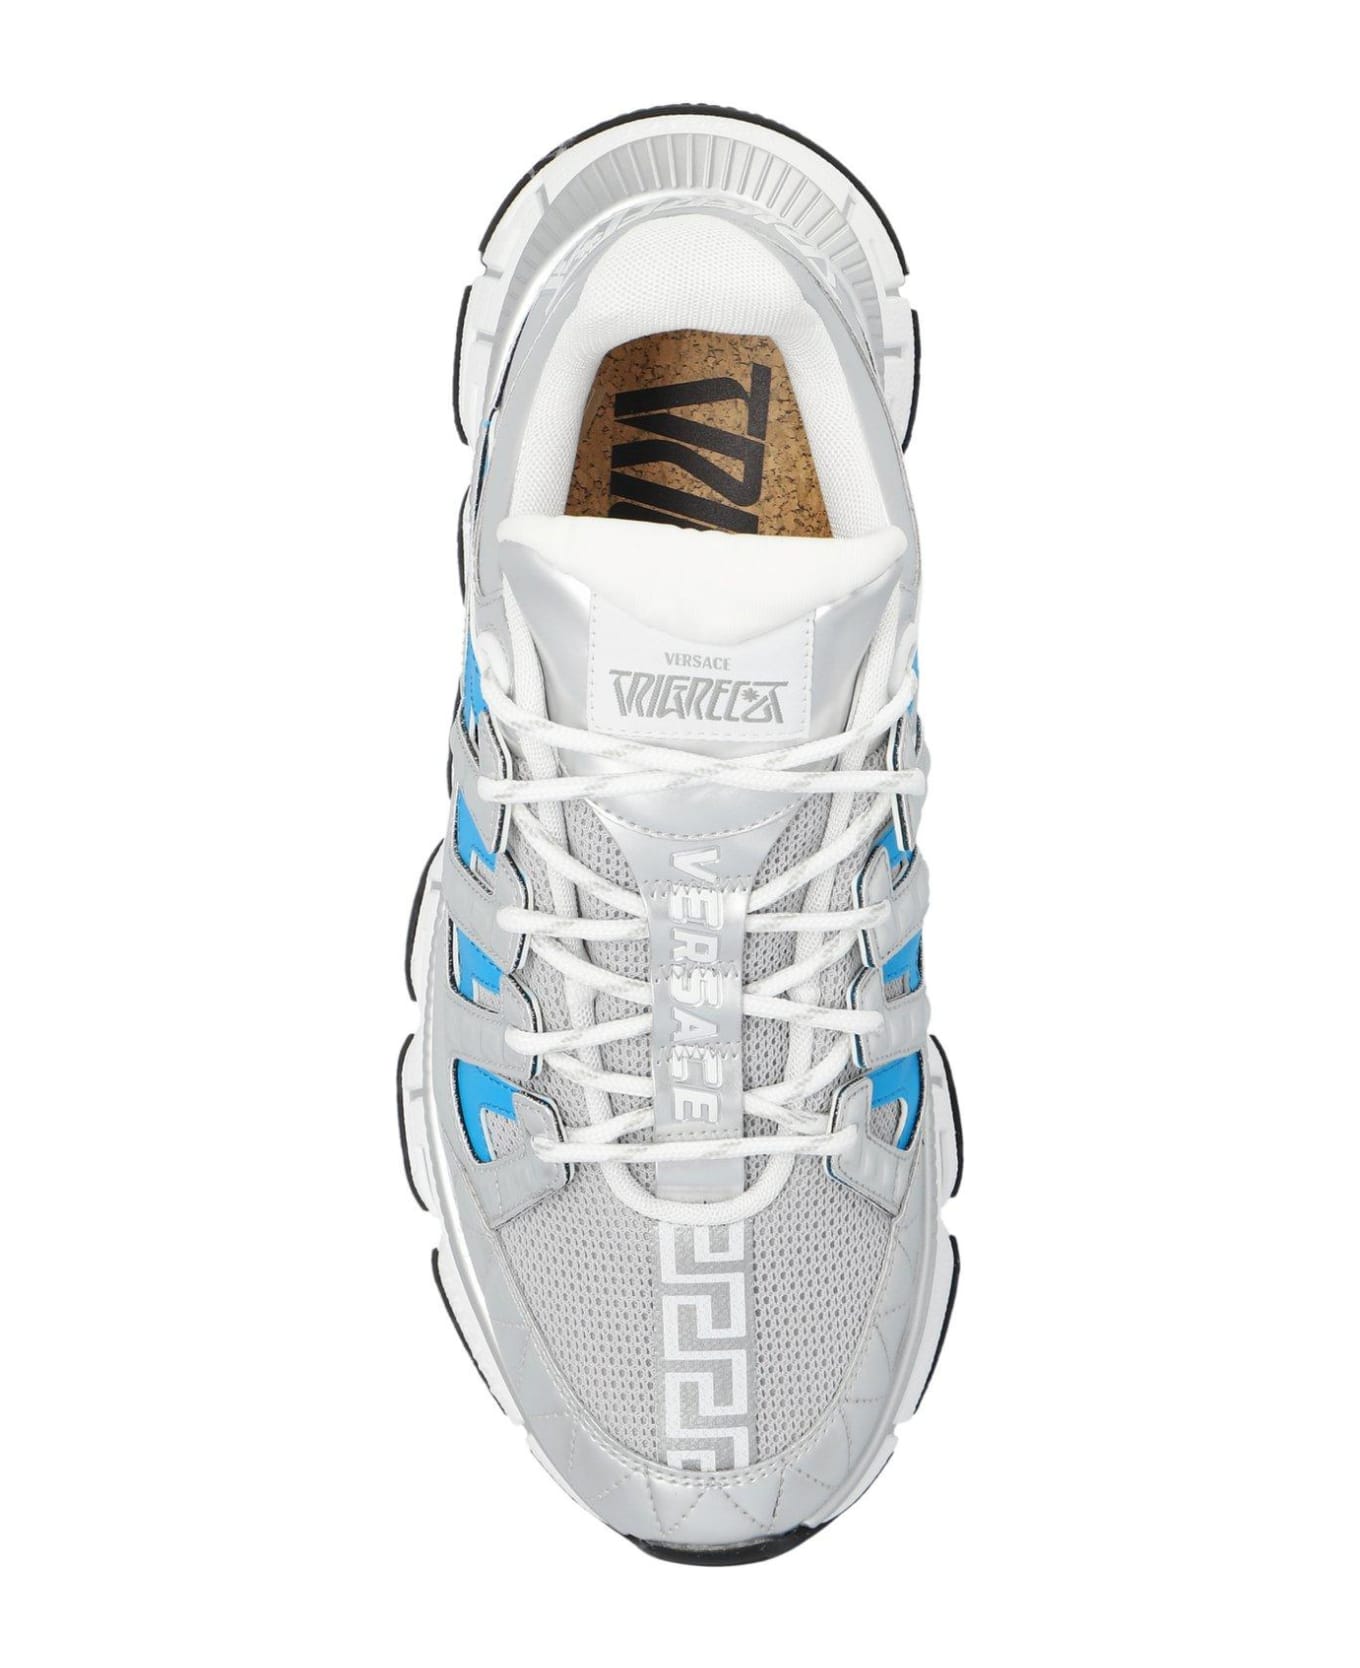 Versace Trigreca Panelled Mesh Lace-up Sneakers - Blu e Argento スニーカー